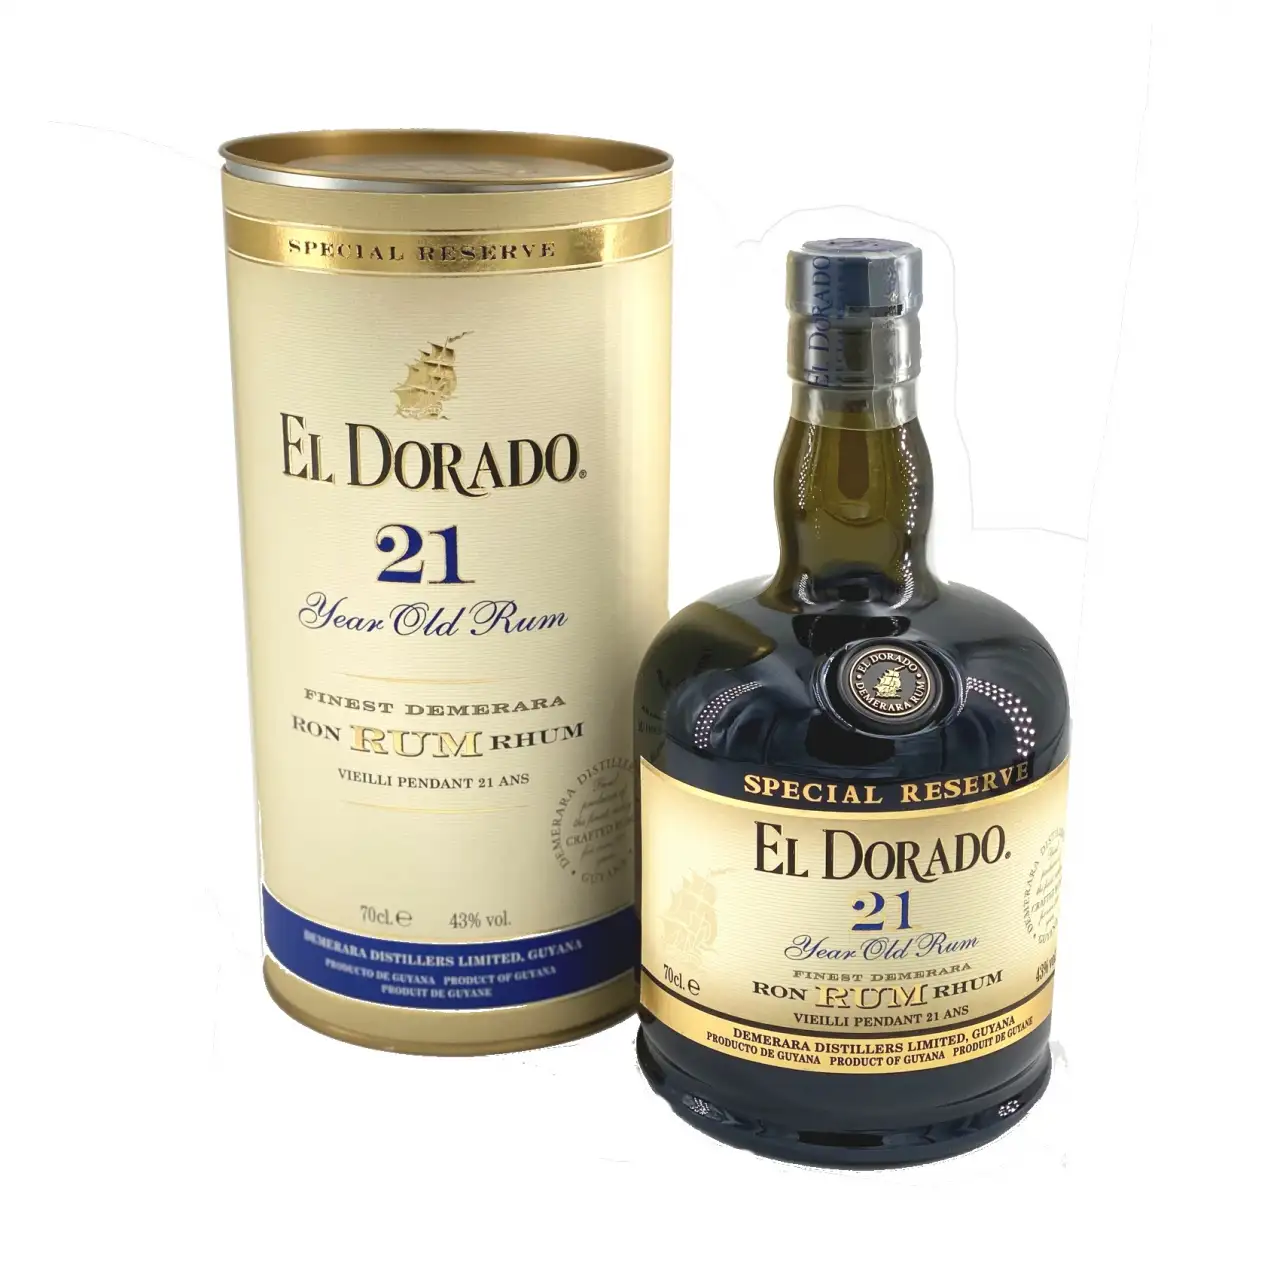 Image of the front of the bottle of the rum El Dorado 21 (2020 Release)